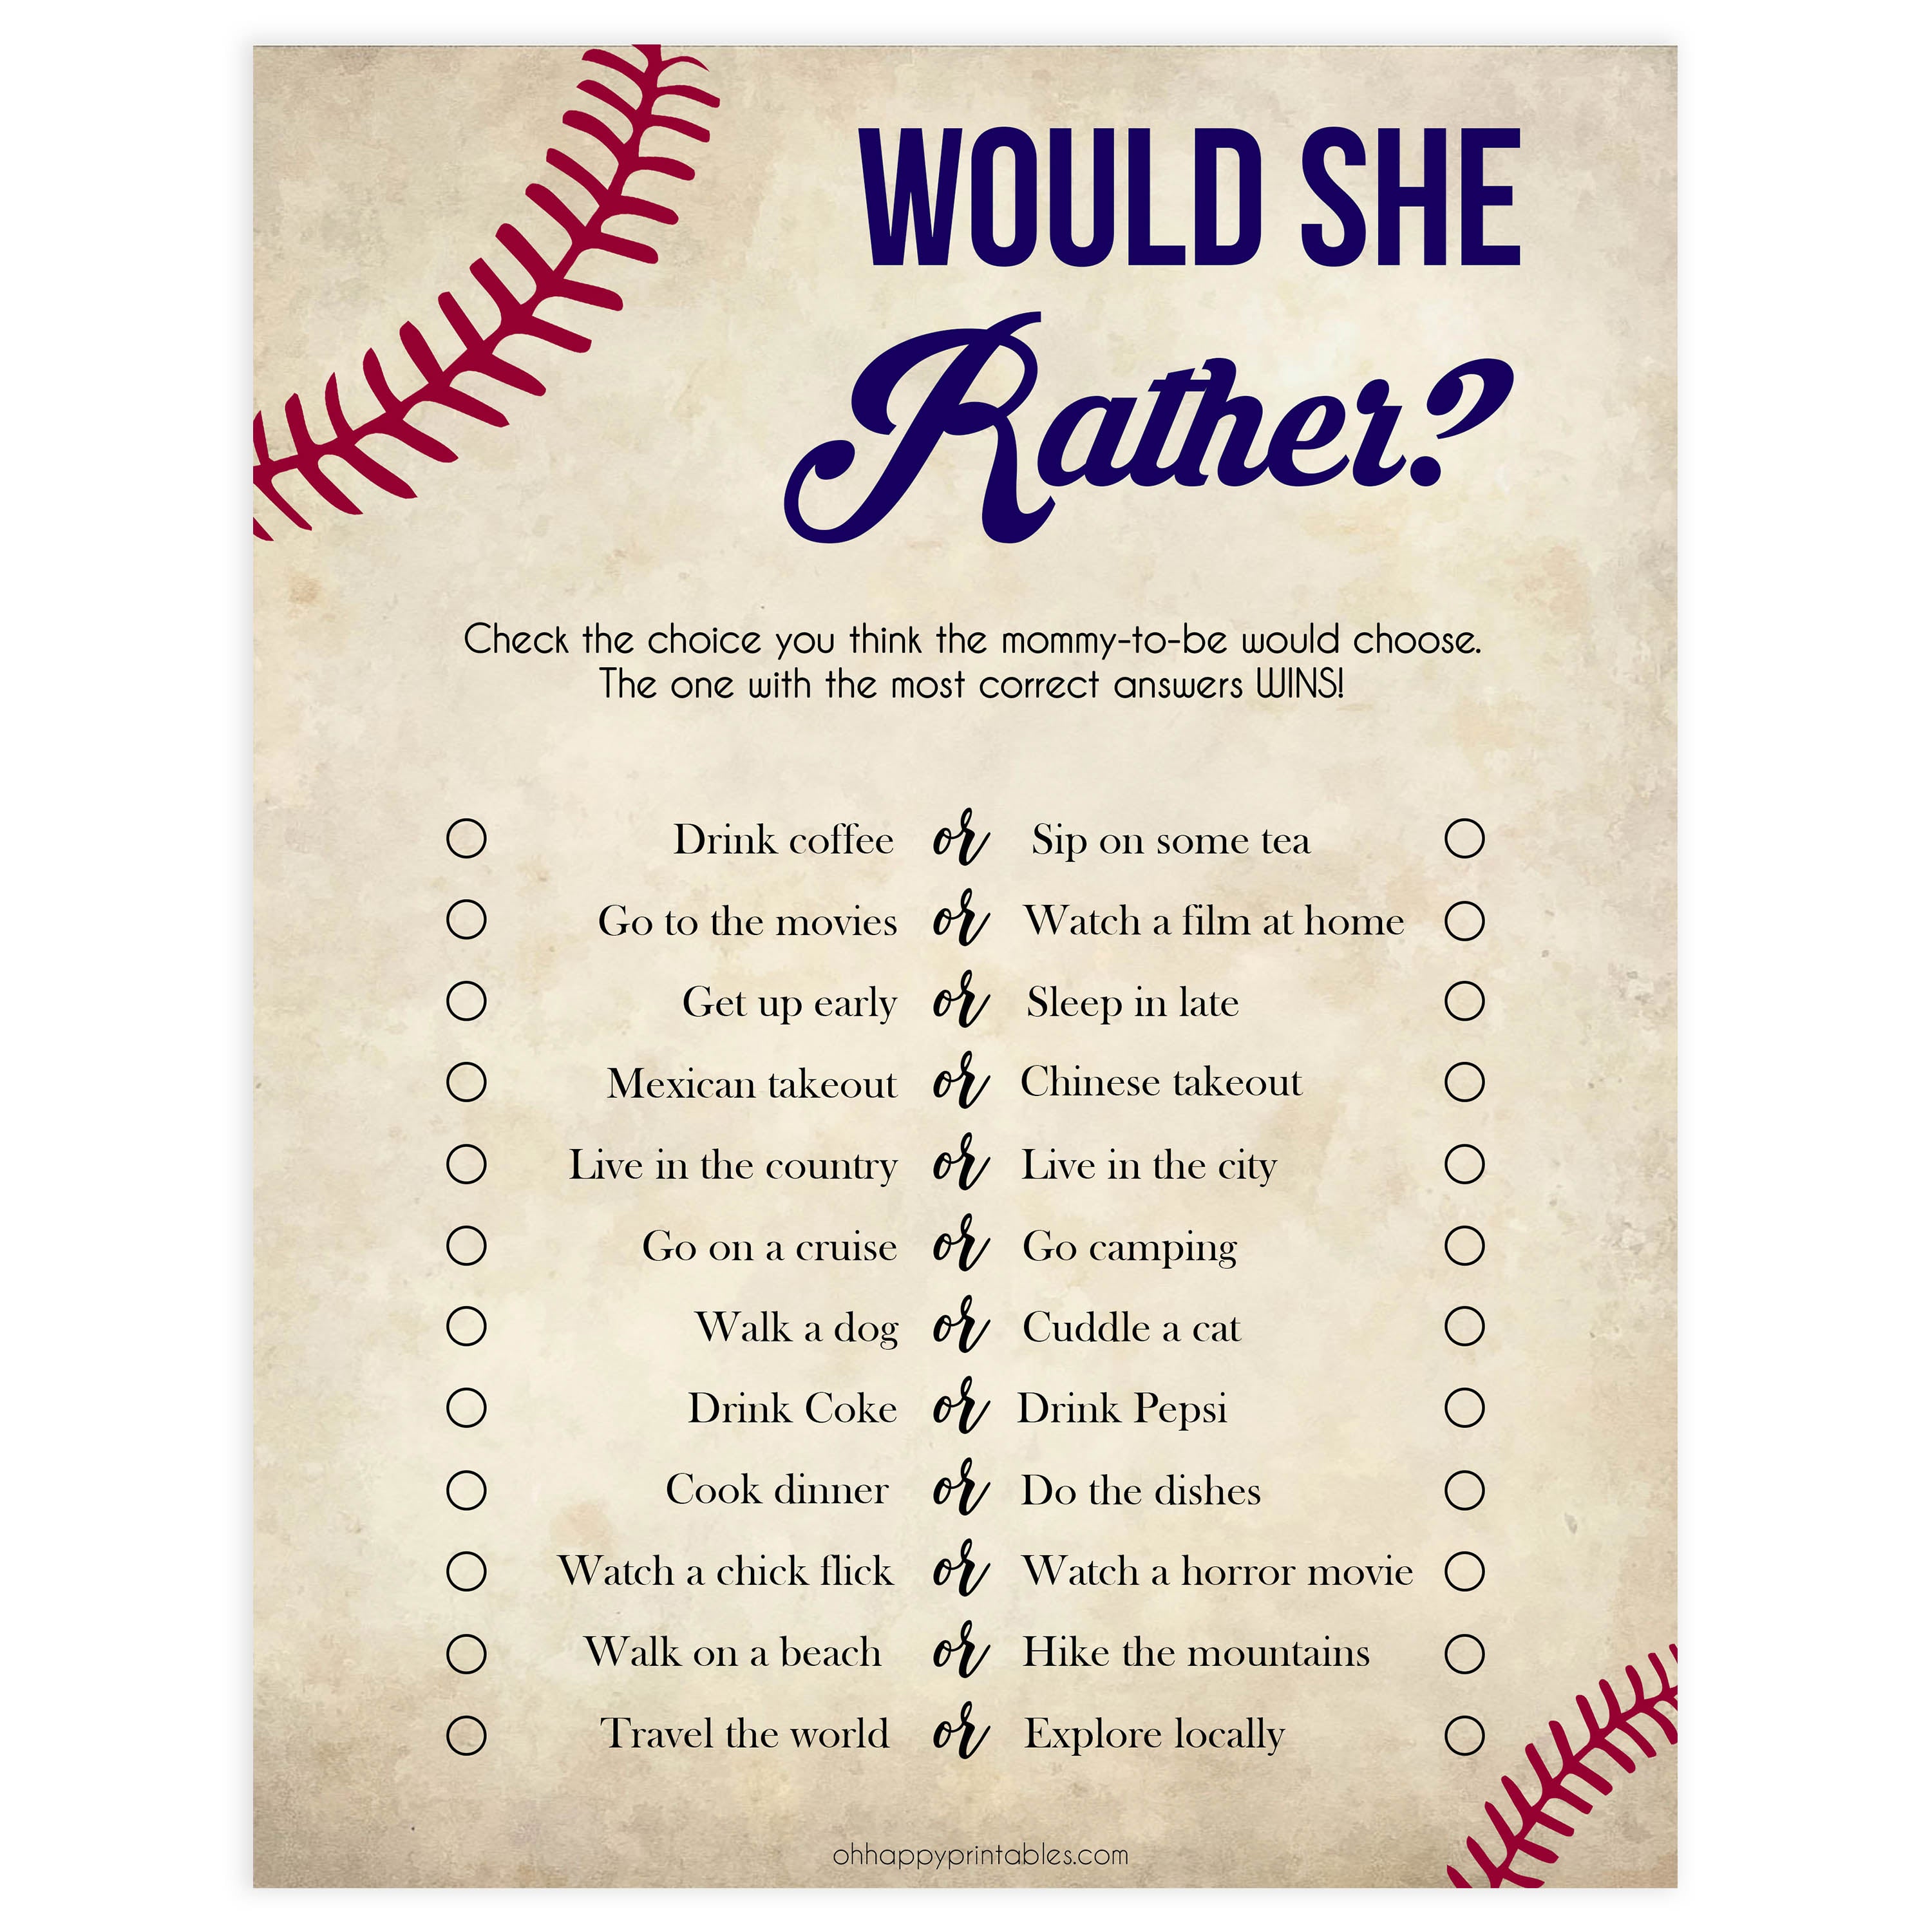 baby would she rather game, Baseball baby shower games, printable baby shower games, fun baby shower games, top baby shower ideas, little slugger baby games